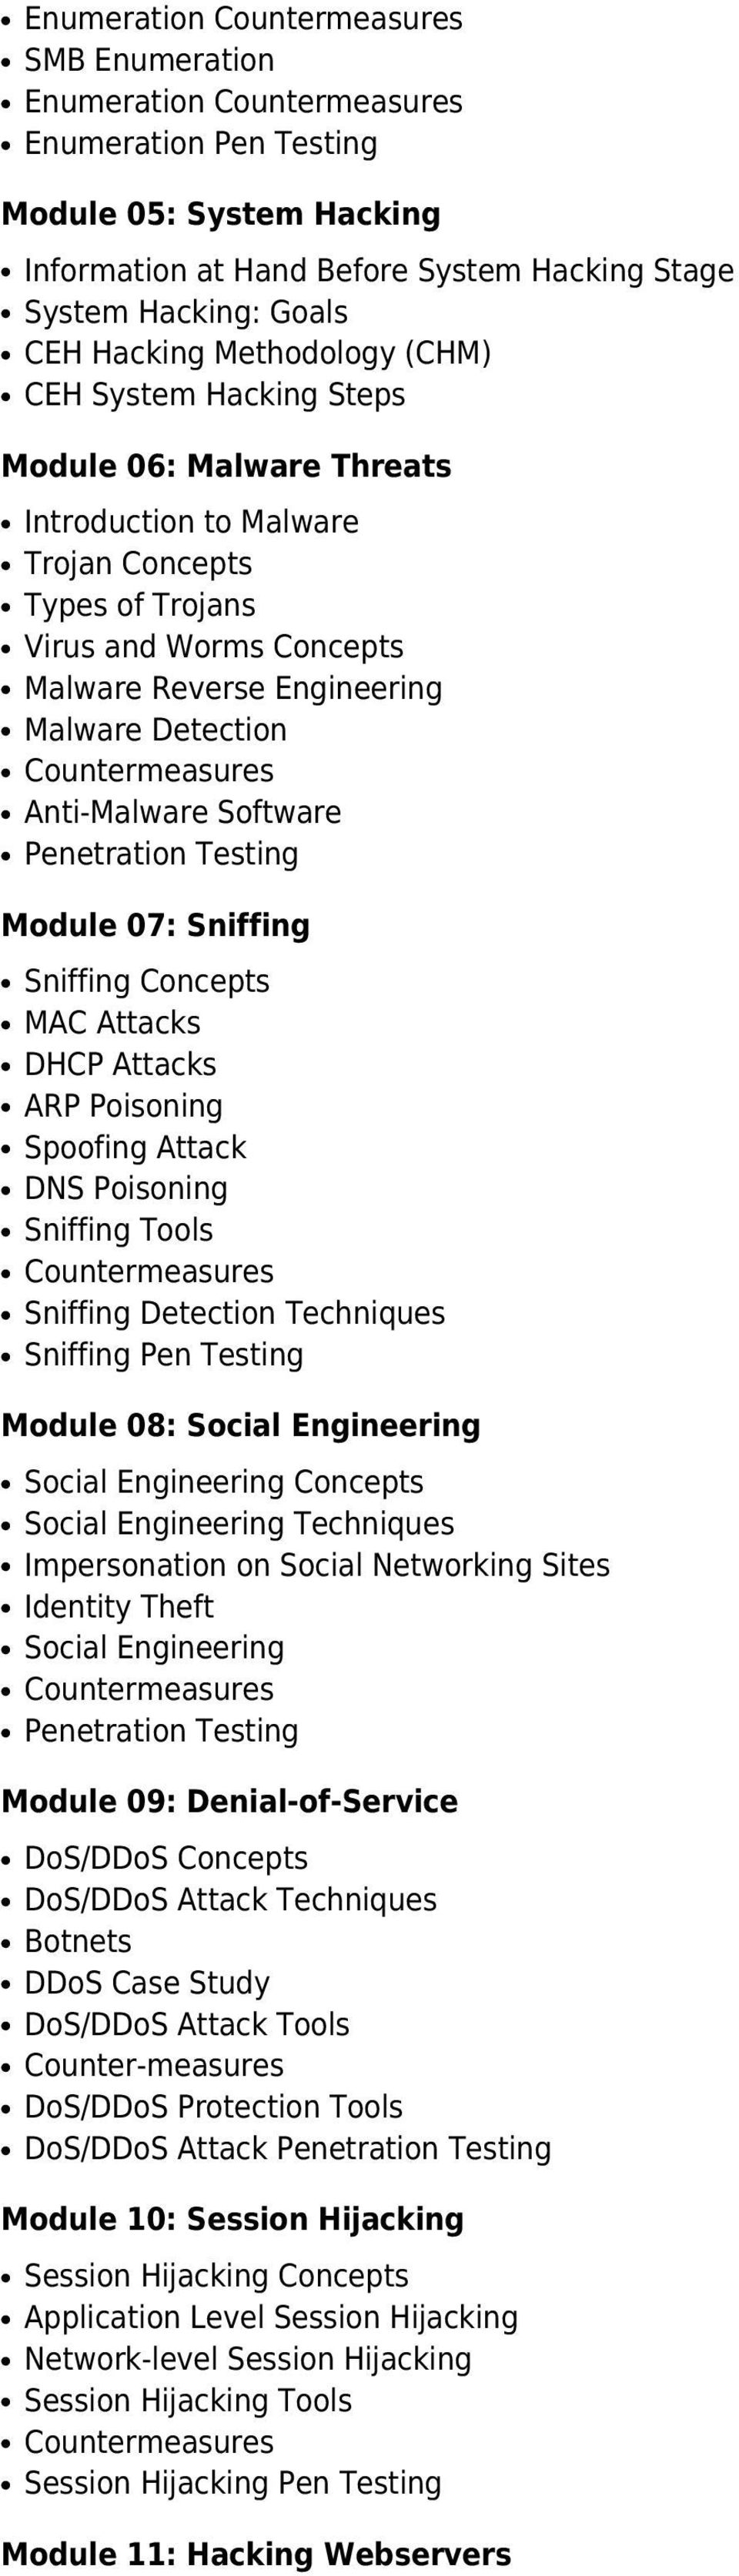 Module 07: Sniffing Sniffing Concepts MAC Attacks DHCP Attacks ARP Poisoning Spoofing Attack DNS Poisoning Sniffing Tools Sniffing Detection Techniques Sniffing Pen Testing Module 08: Social